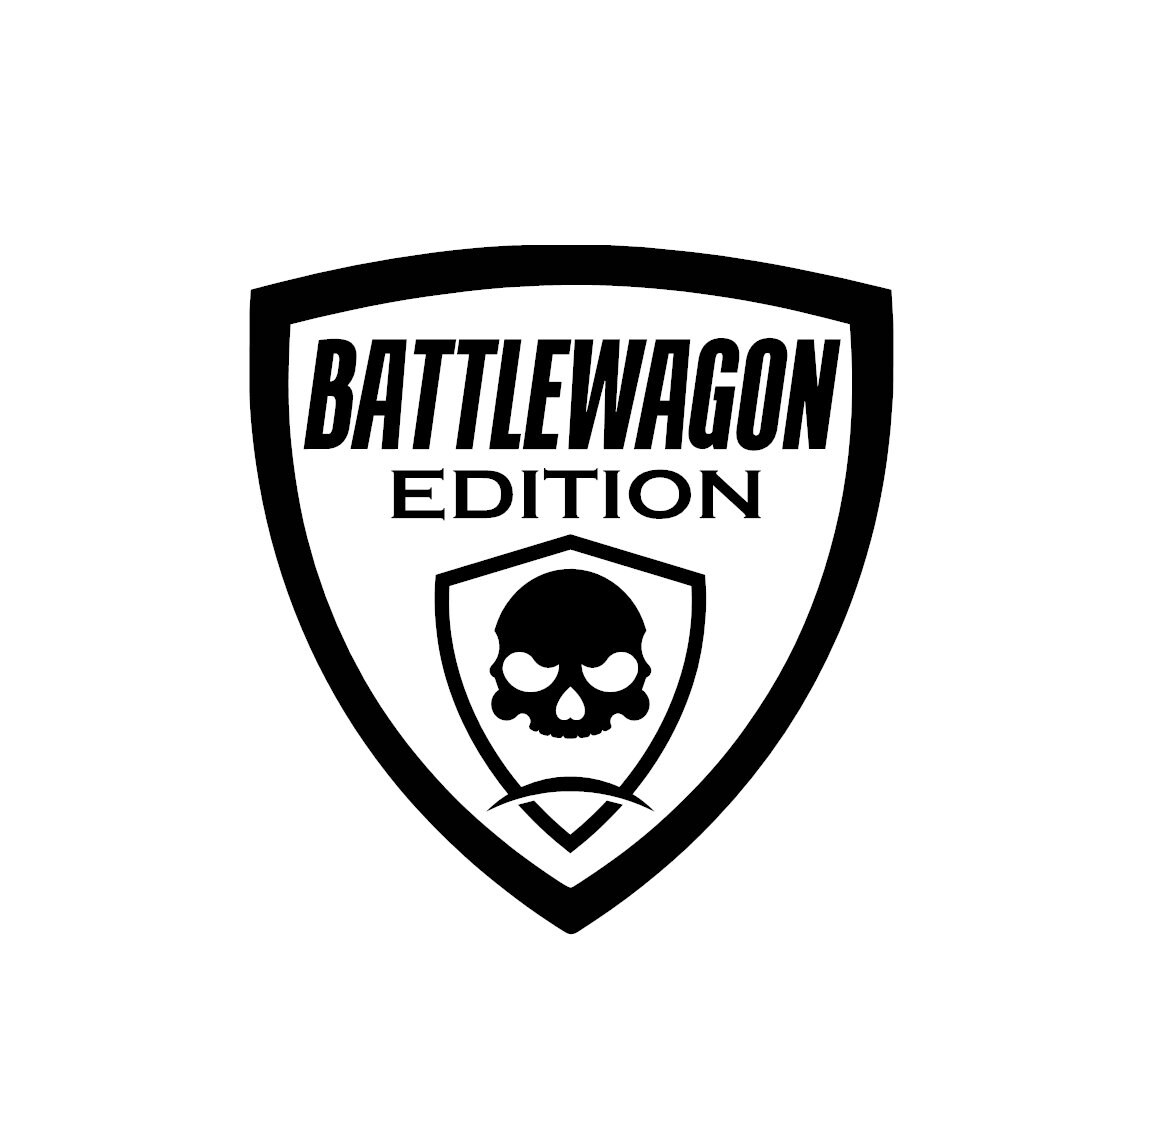 Battlewagon edition decal for sale  